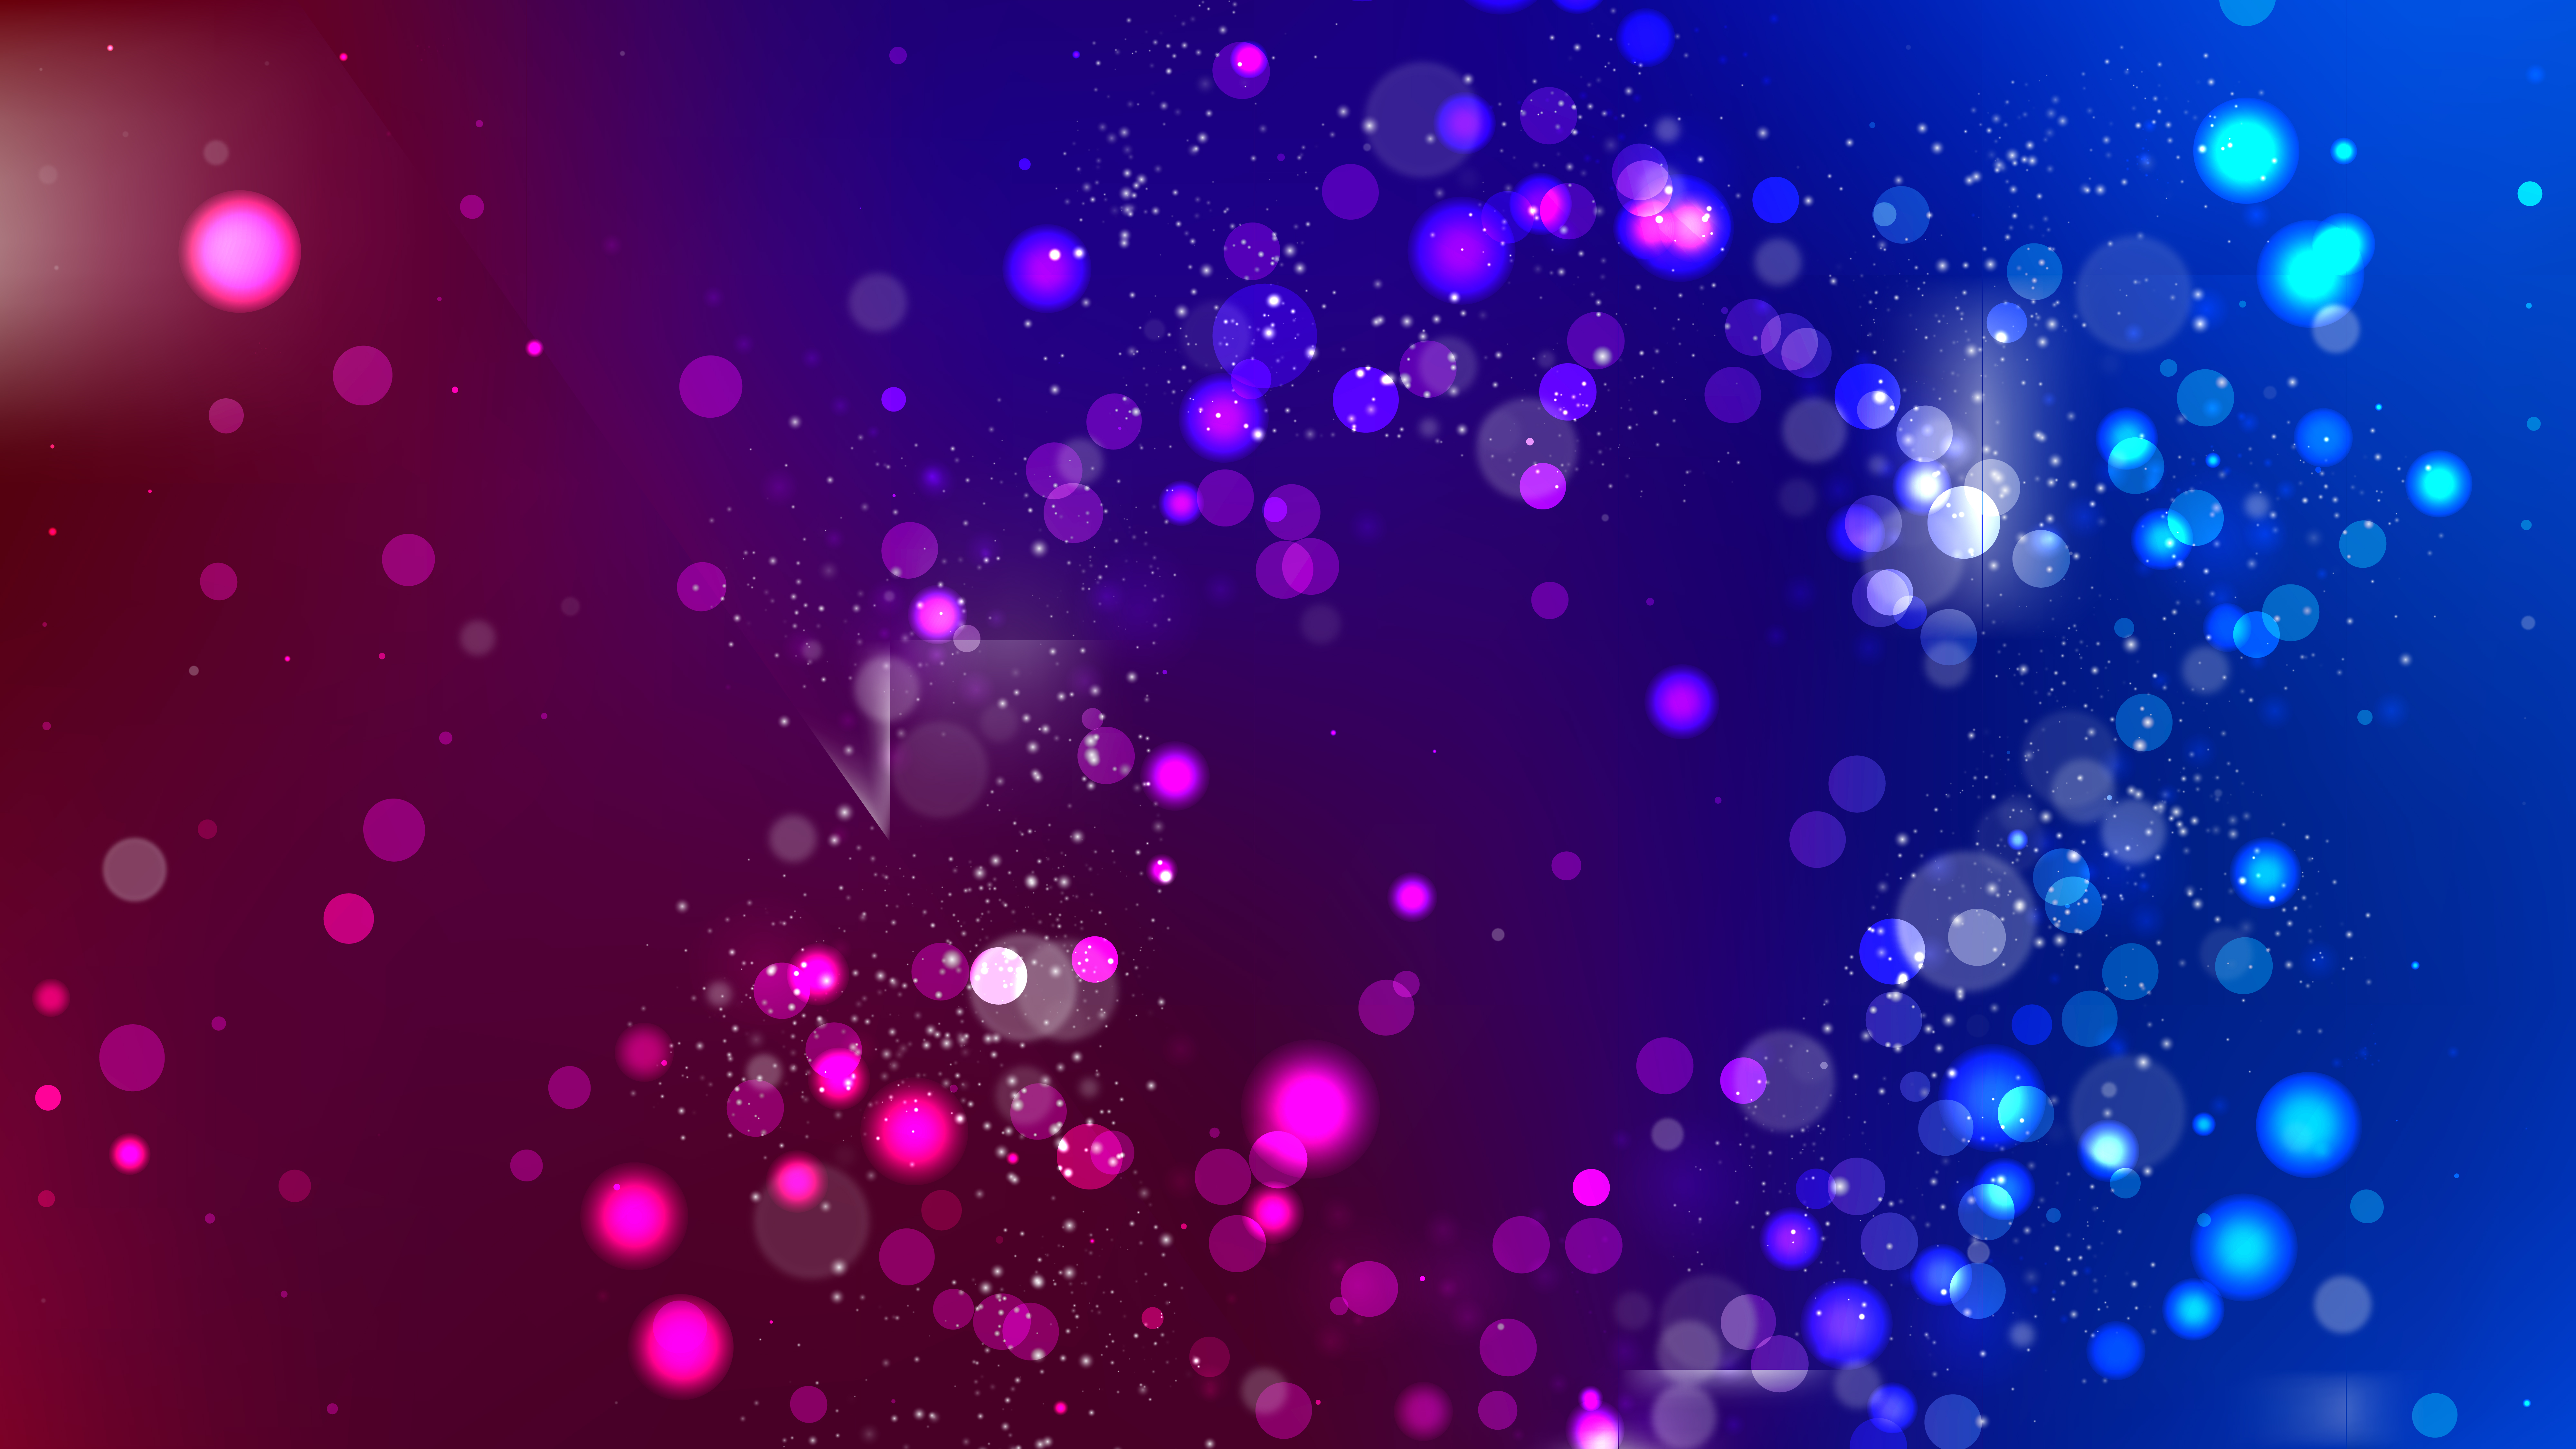 Free Abstract Red and Blue Blurry Lights Background Image